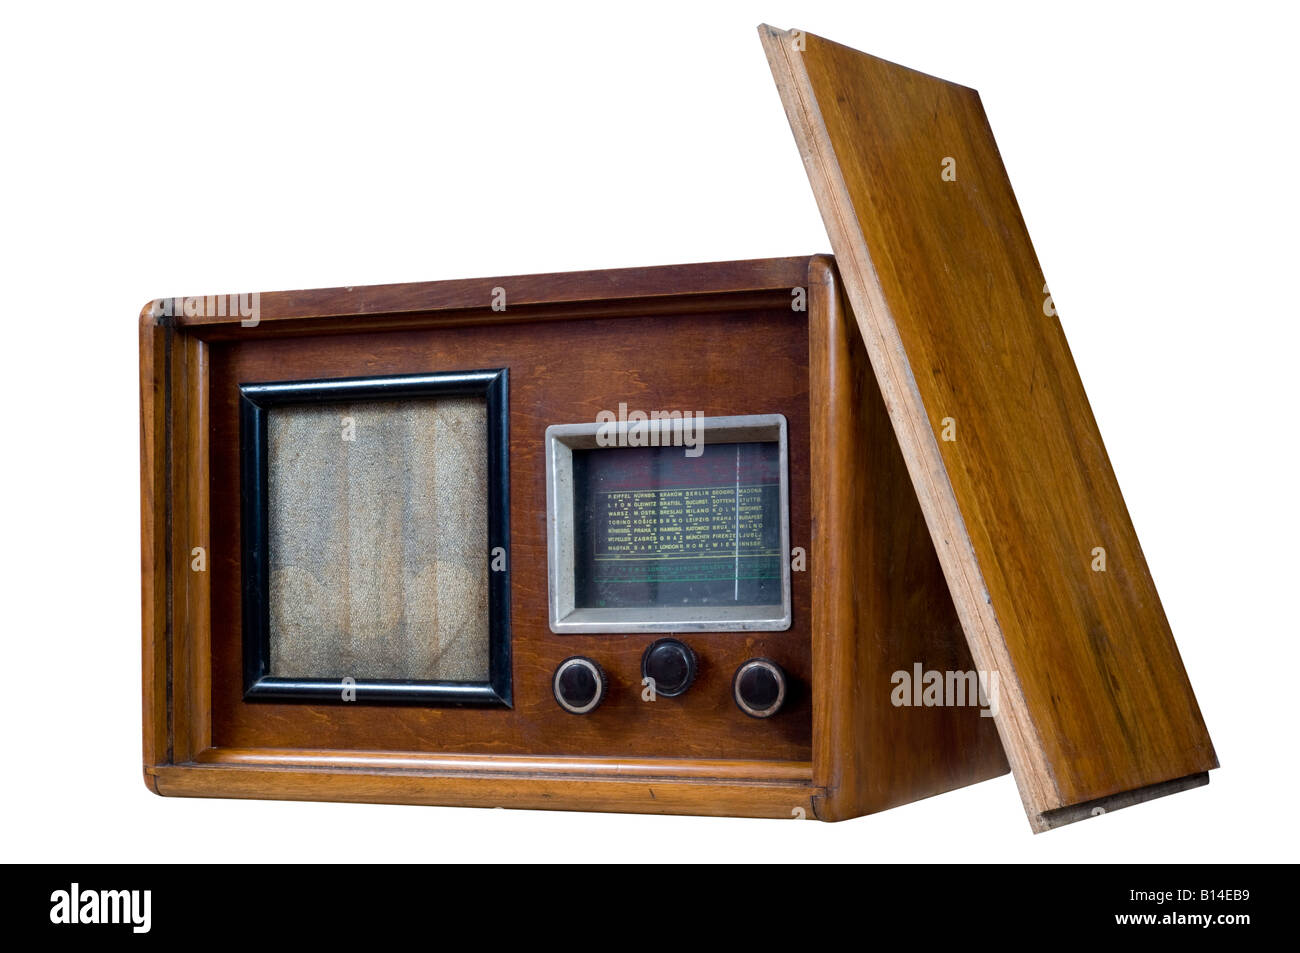 Old wooden radio with front cover on white background. Stock Photo